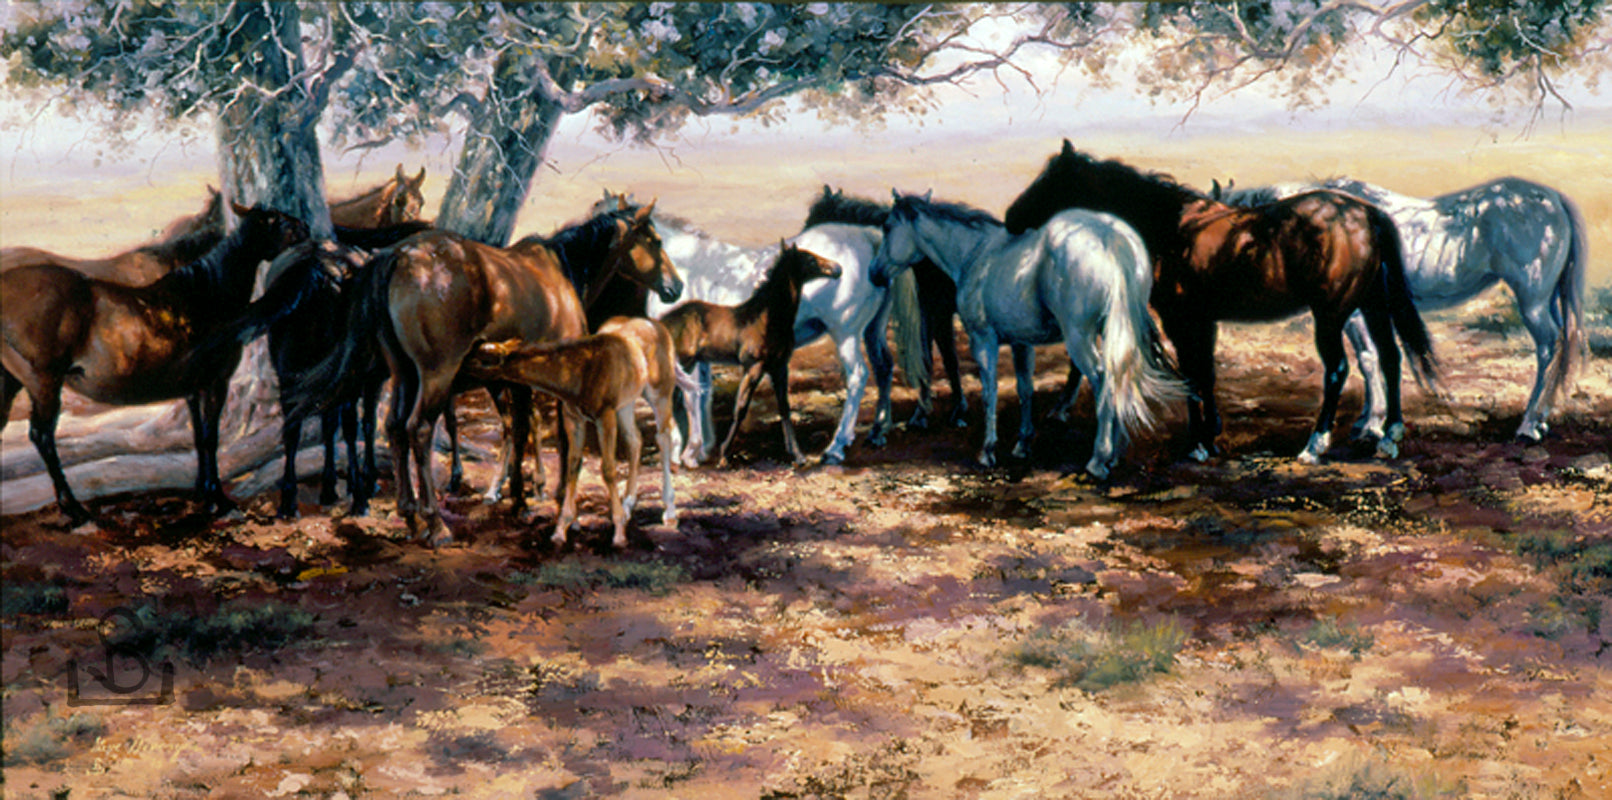 Cheyenne Social Club by Steve Devenyns is a Standard Print in various sizes. This piece features a small herd of horses finding shade in a tree. Steve Devenyns is a world renowned Fine Western Artists located in Cody, Wyoming. His Award winning western art has been featured in the Buffalo Bill Art Show, Prix de West.